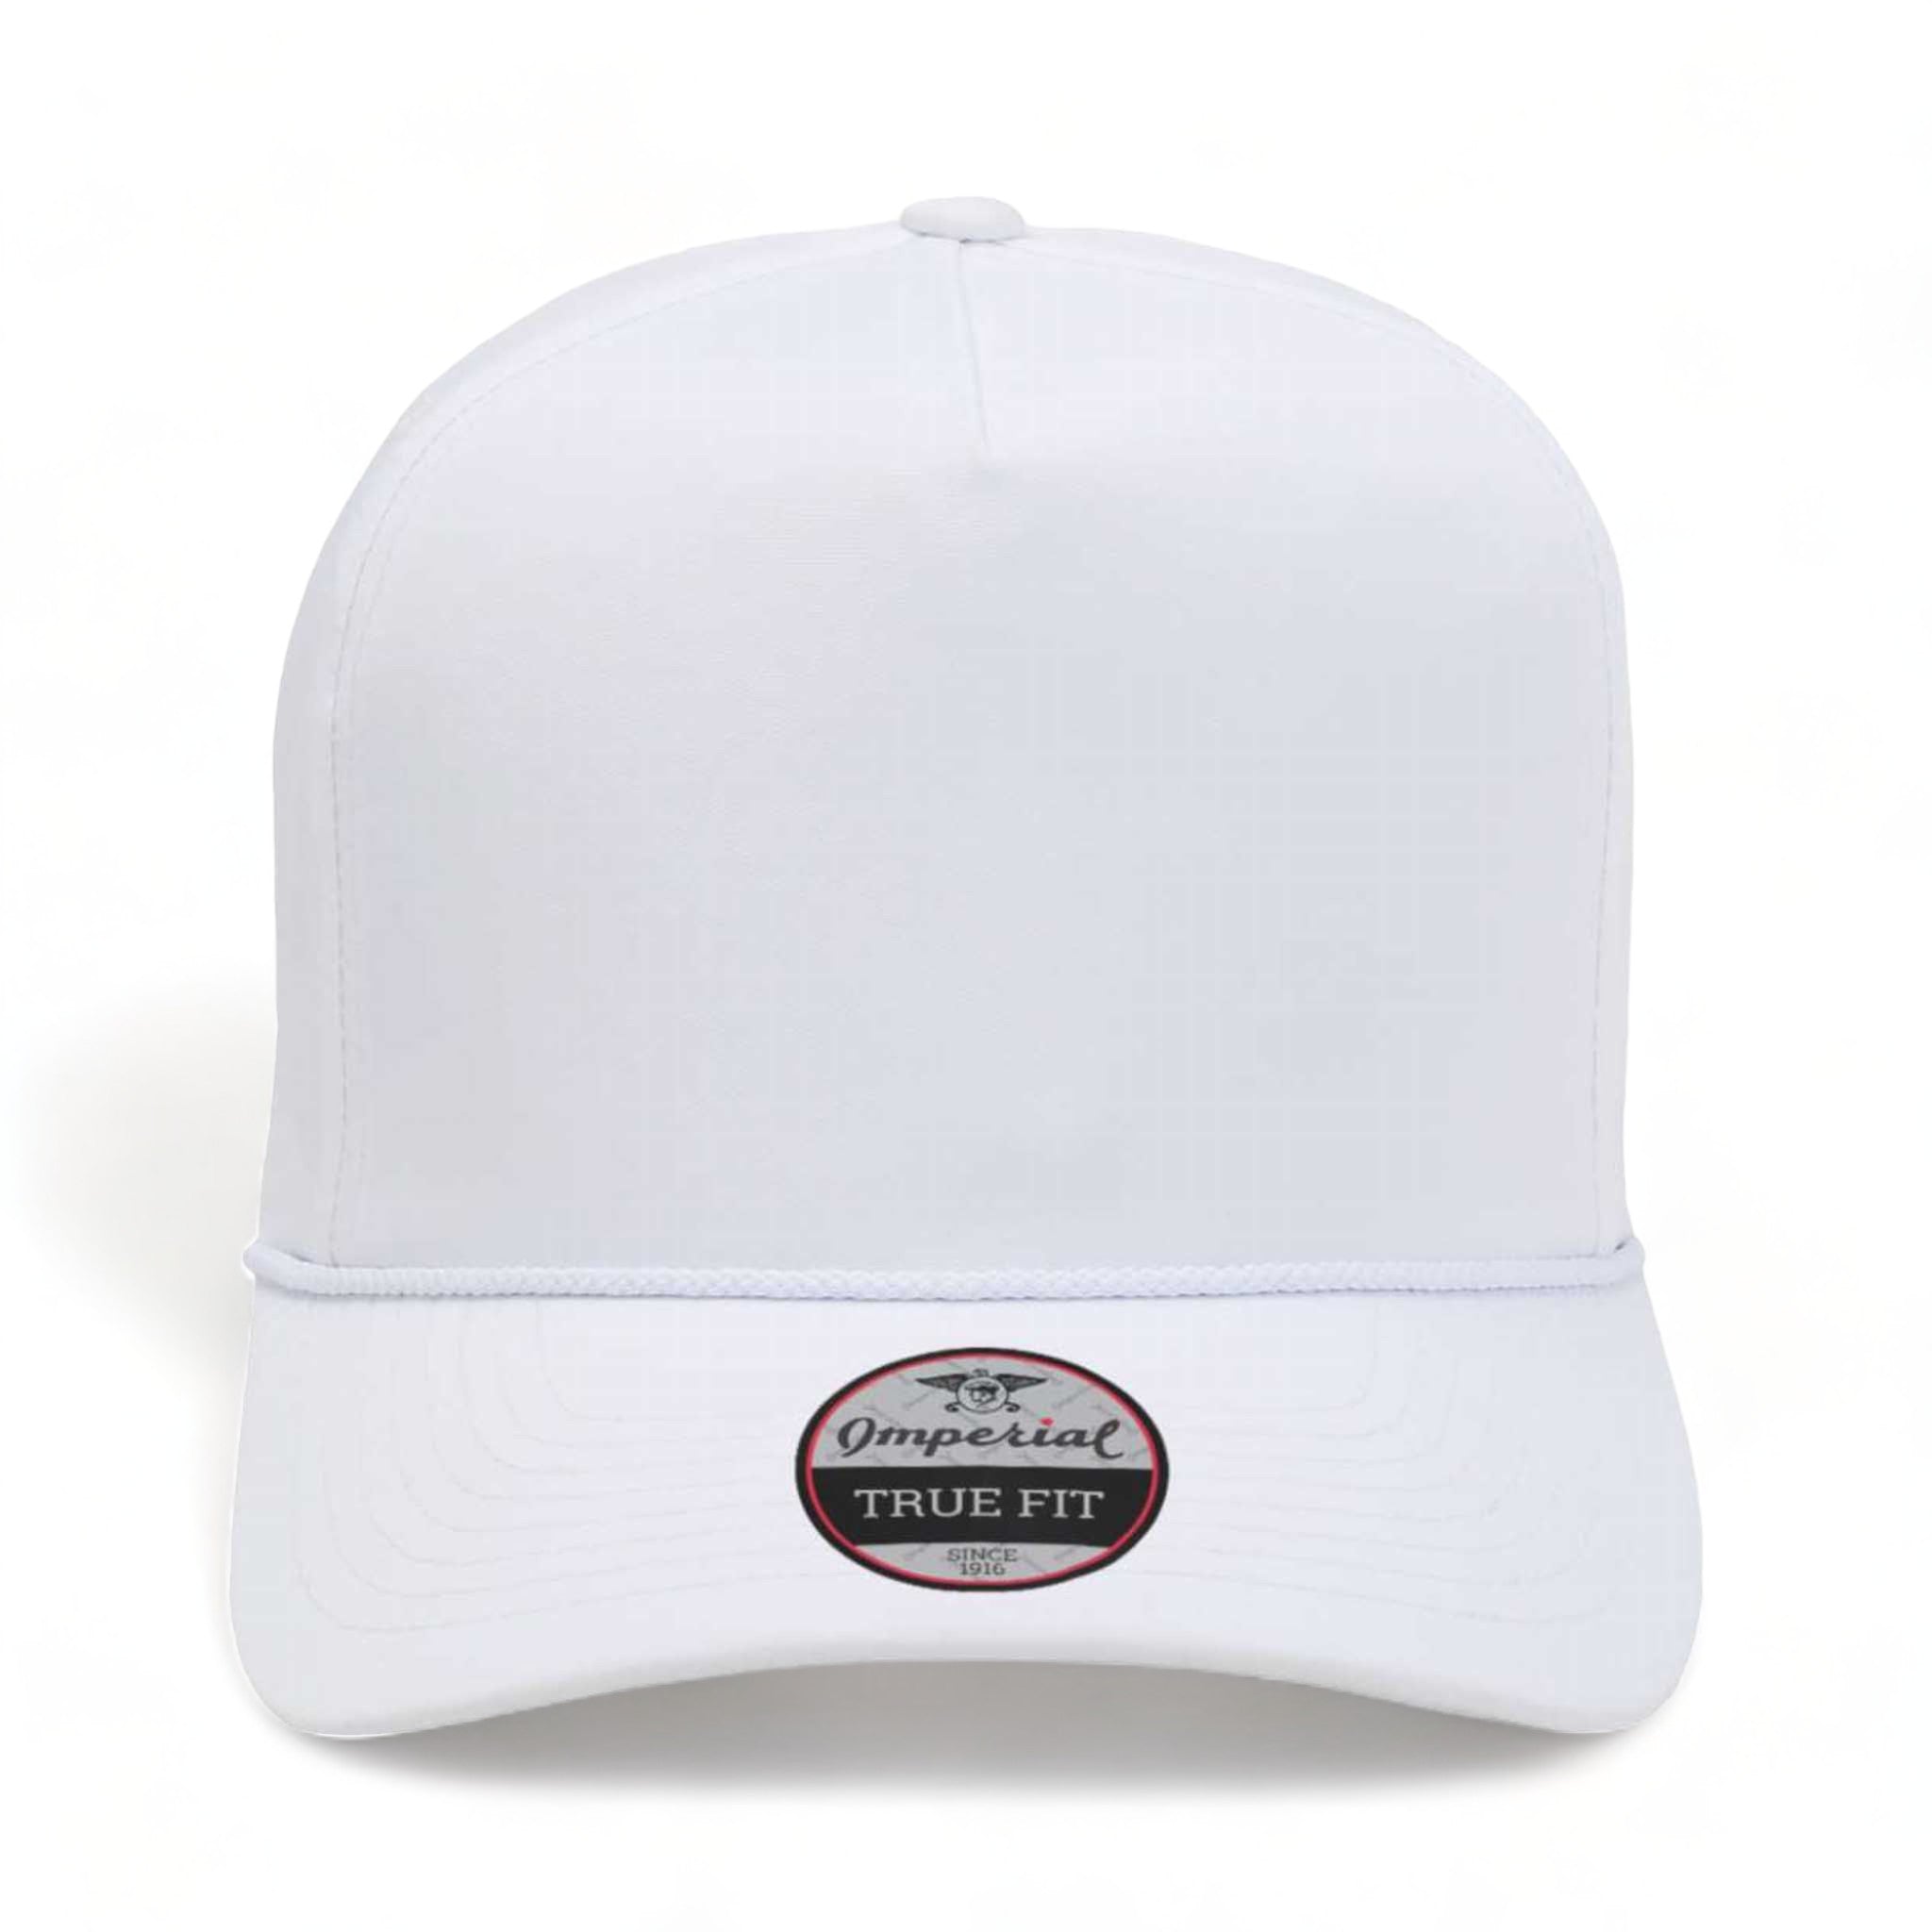 Front view of Imperial 5054 custom hat in white and white